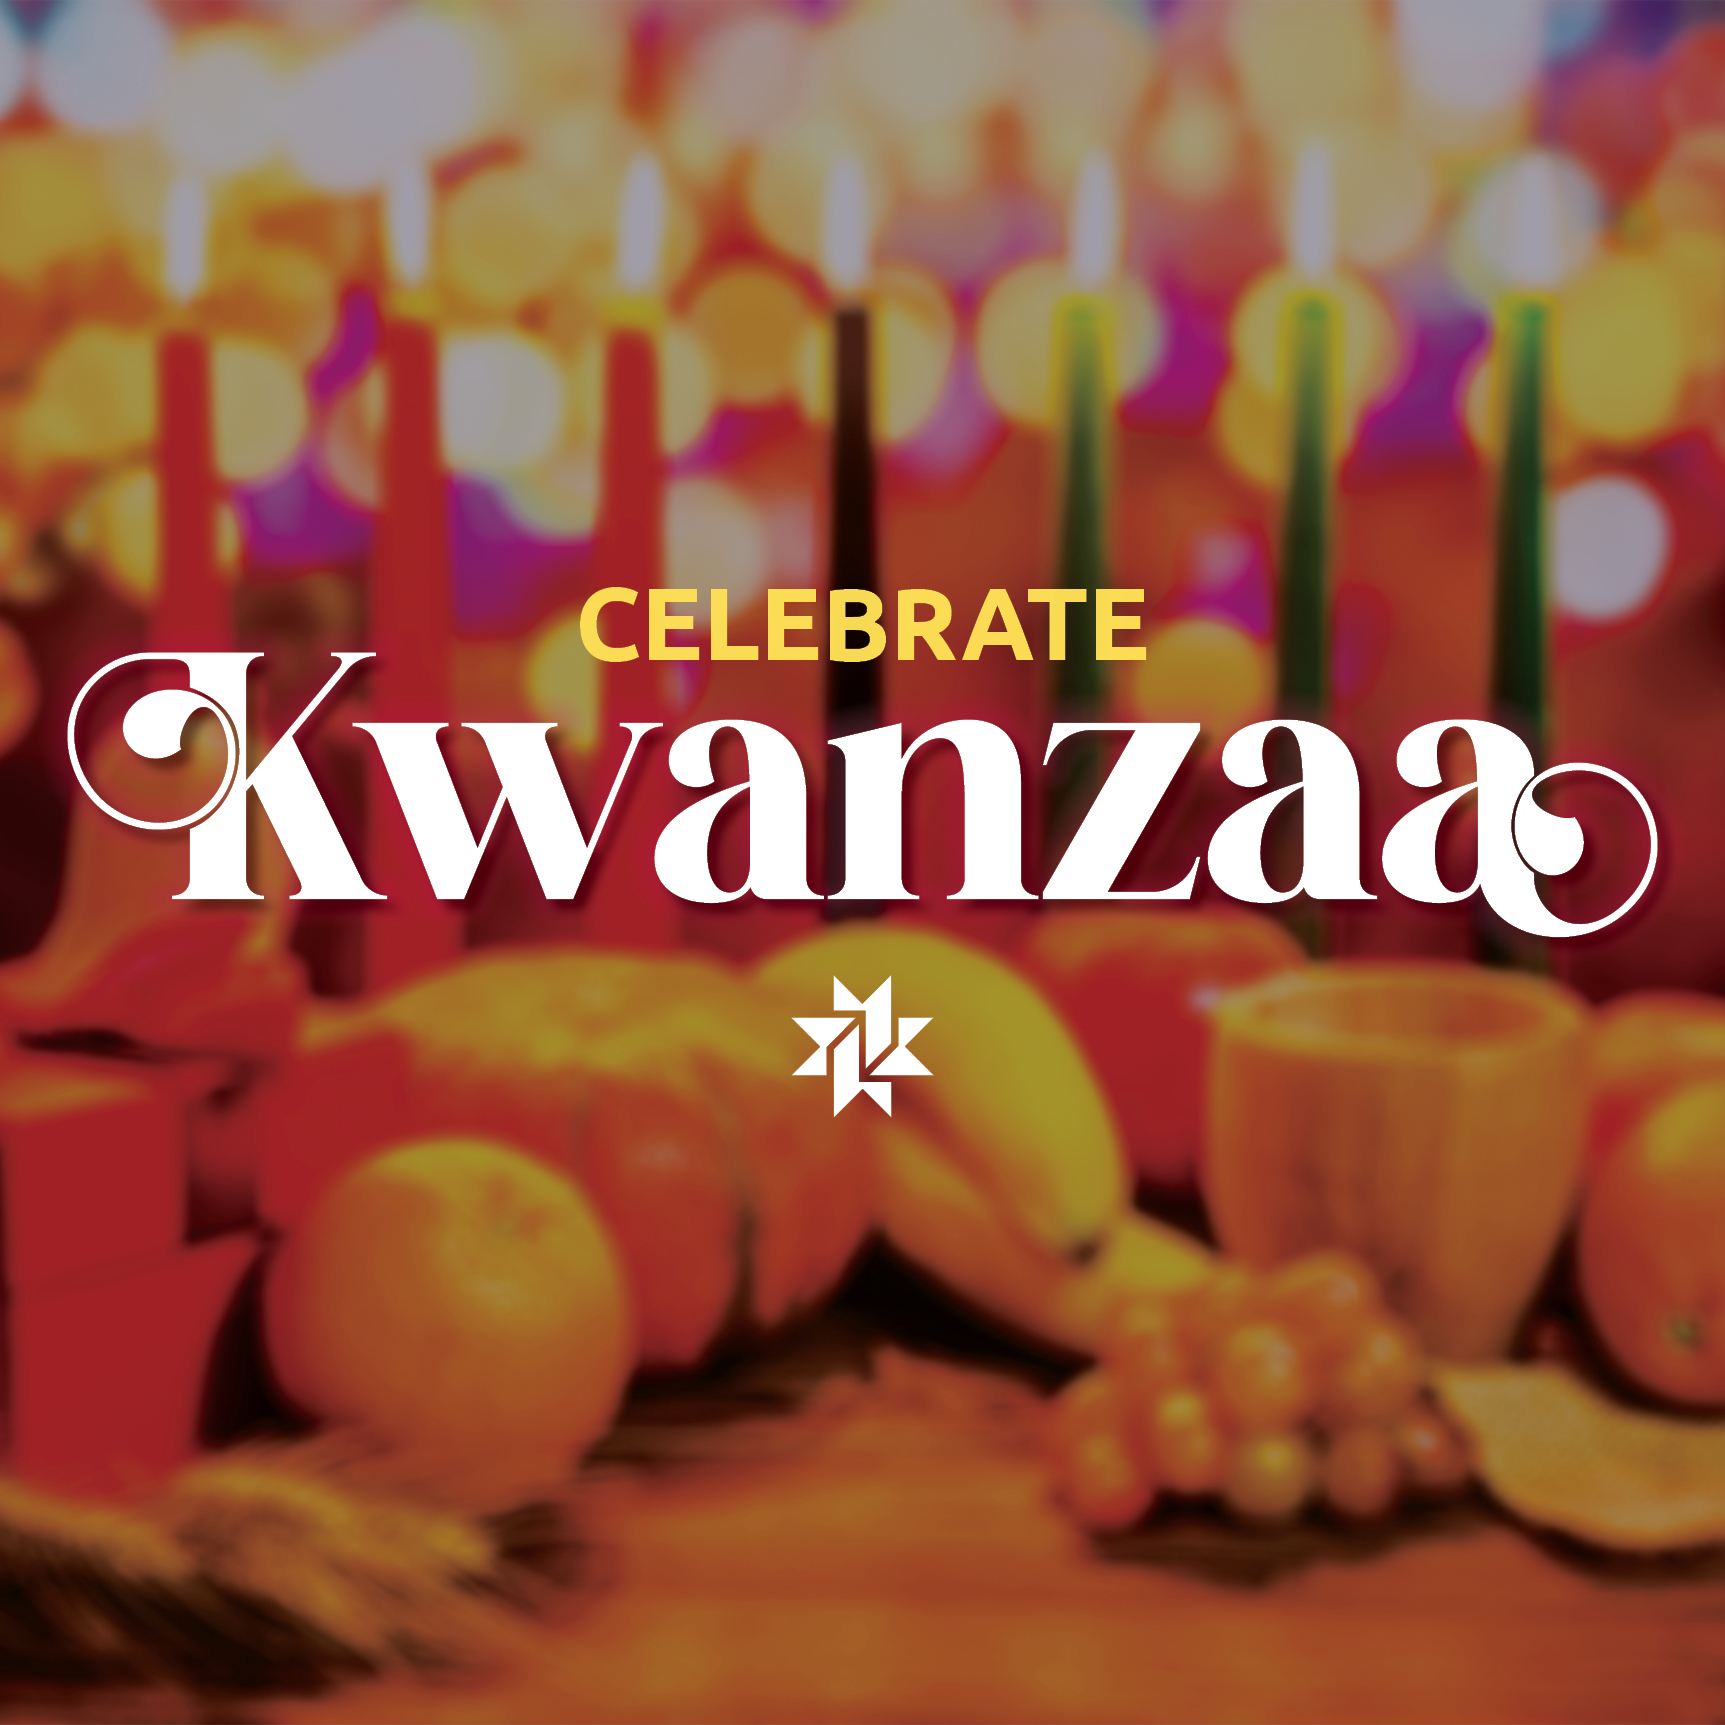 Umoja (Unity)! Celebrate Kwanzaa with Special Guests Friends of Joda & Sarah Graham, Educator and Social Justice Advocate 